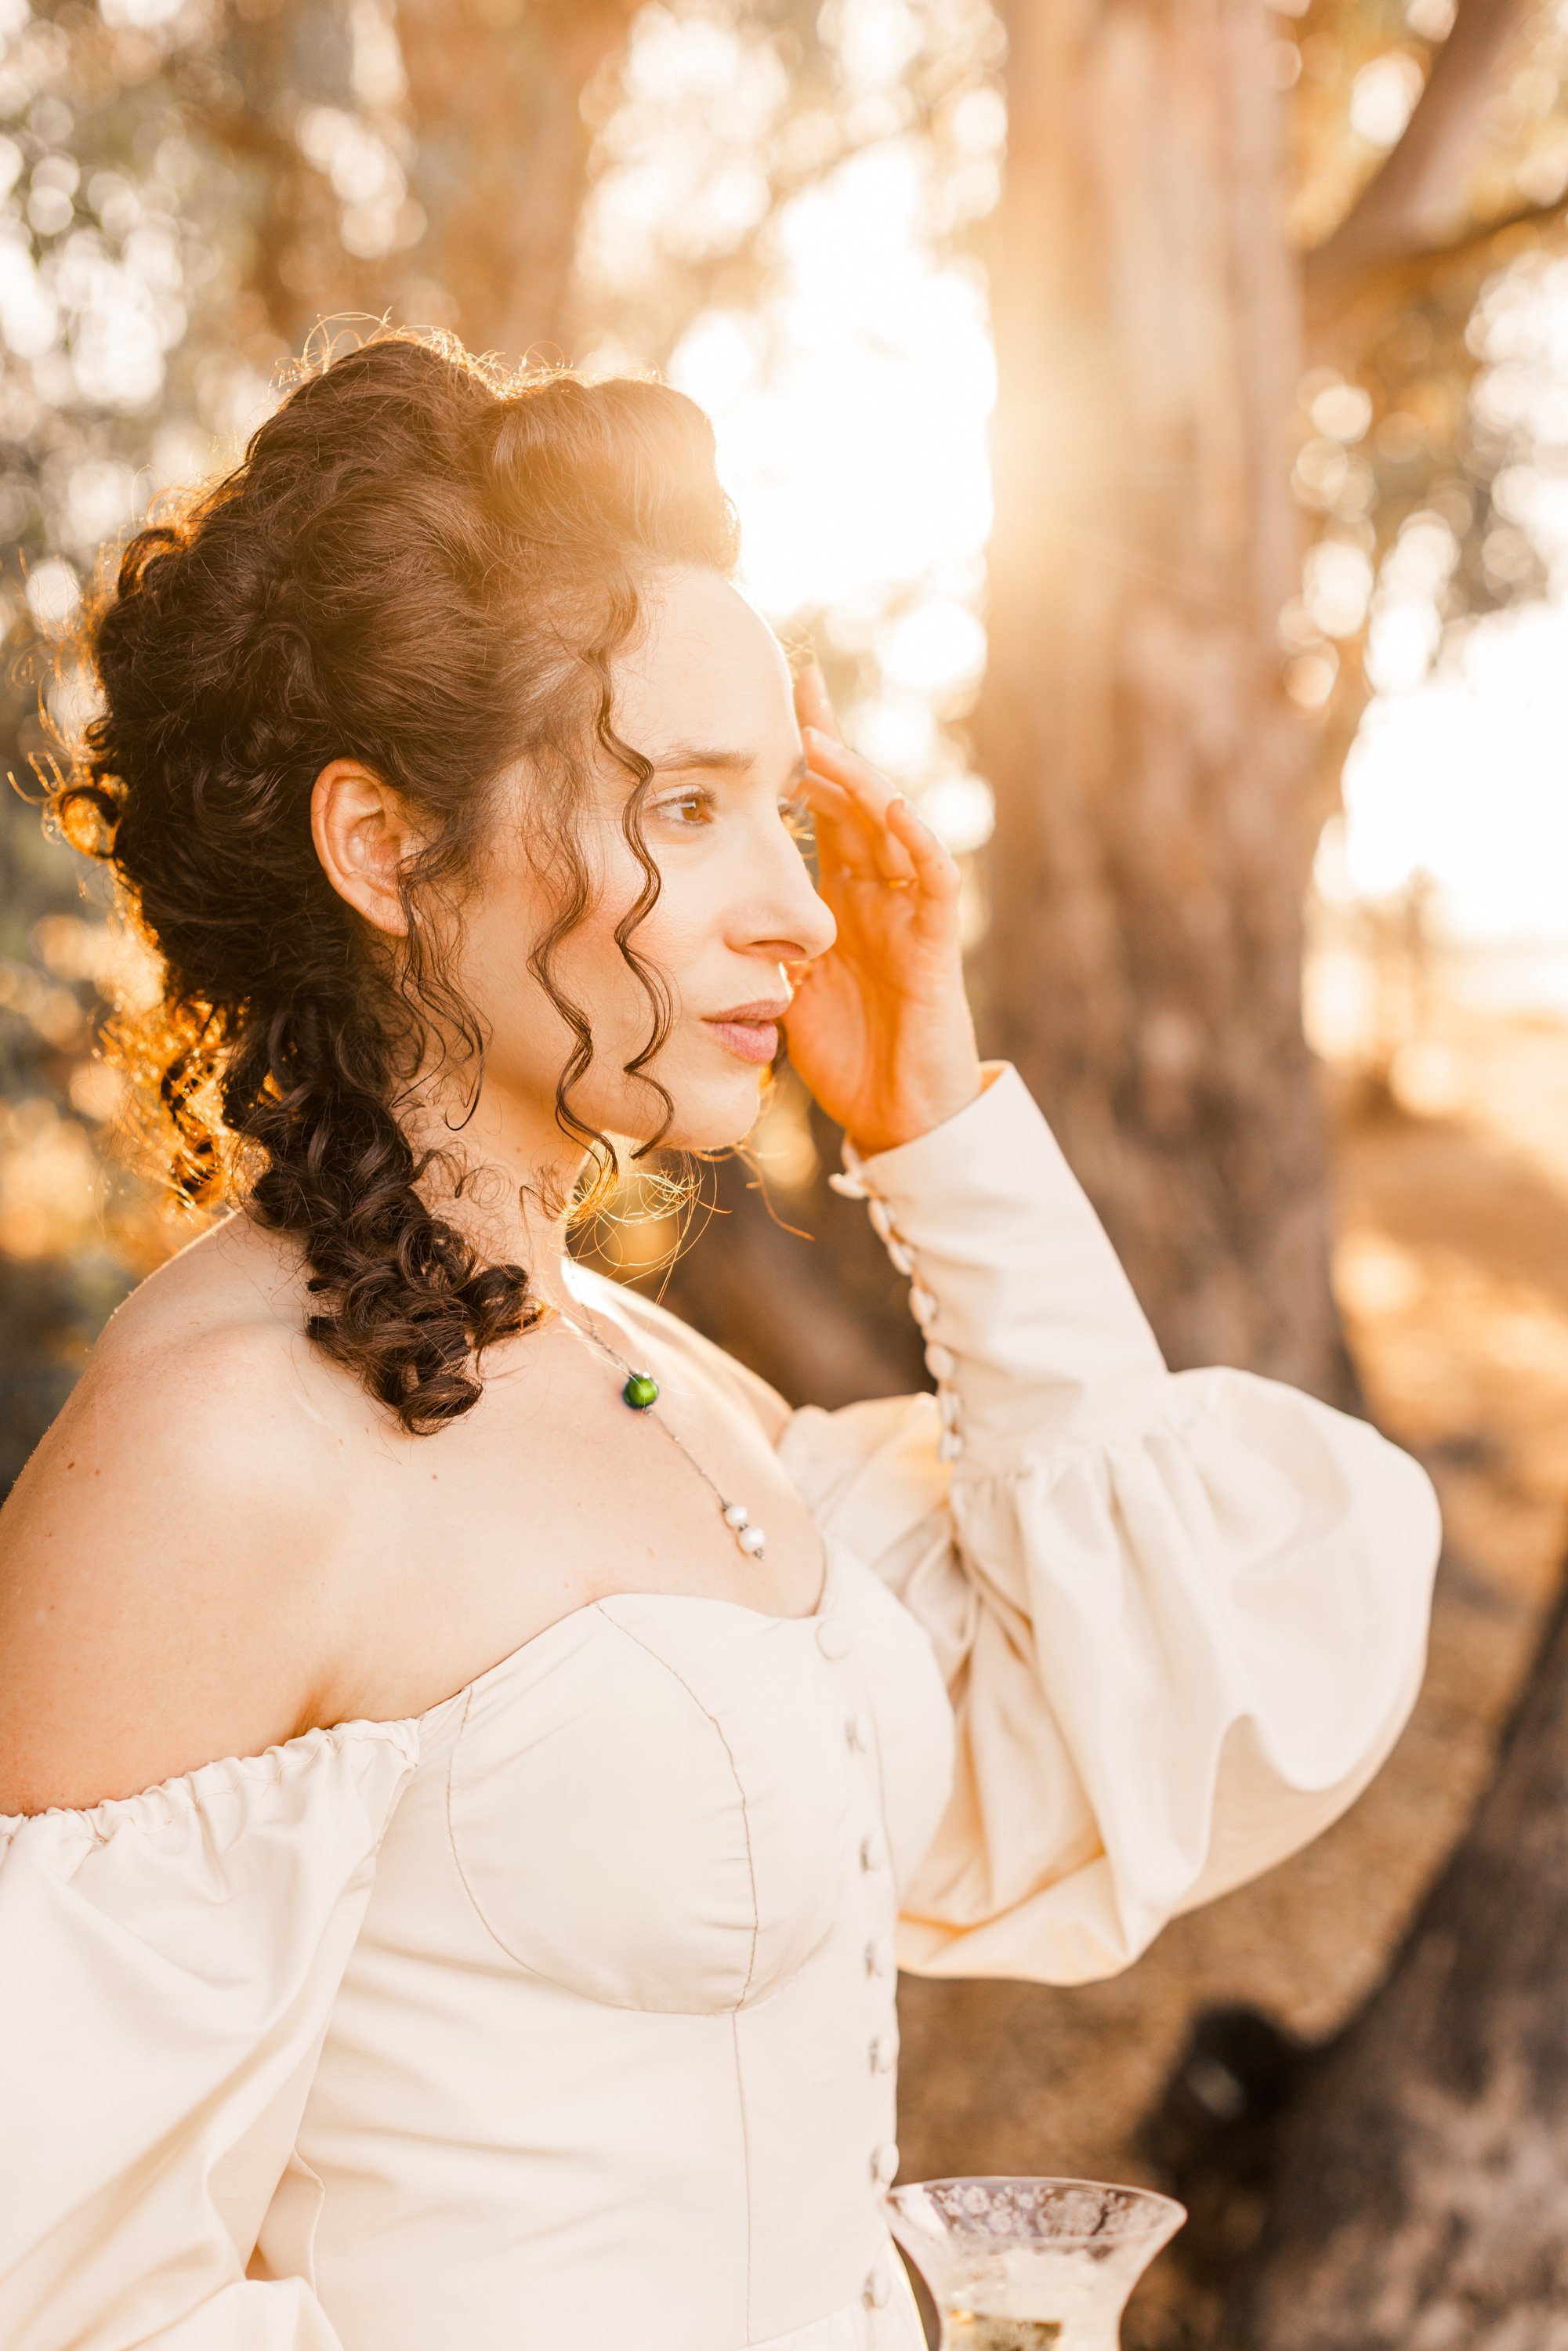 www.santabarbarawedding.com | Veils &amp; Tails | Kelly Rose | Dalliance Gown Rentals | Model with the Sun in the Background